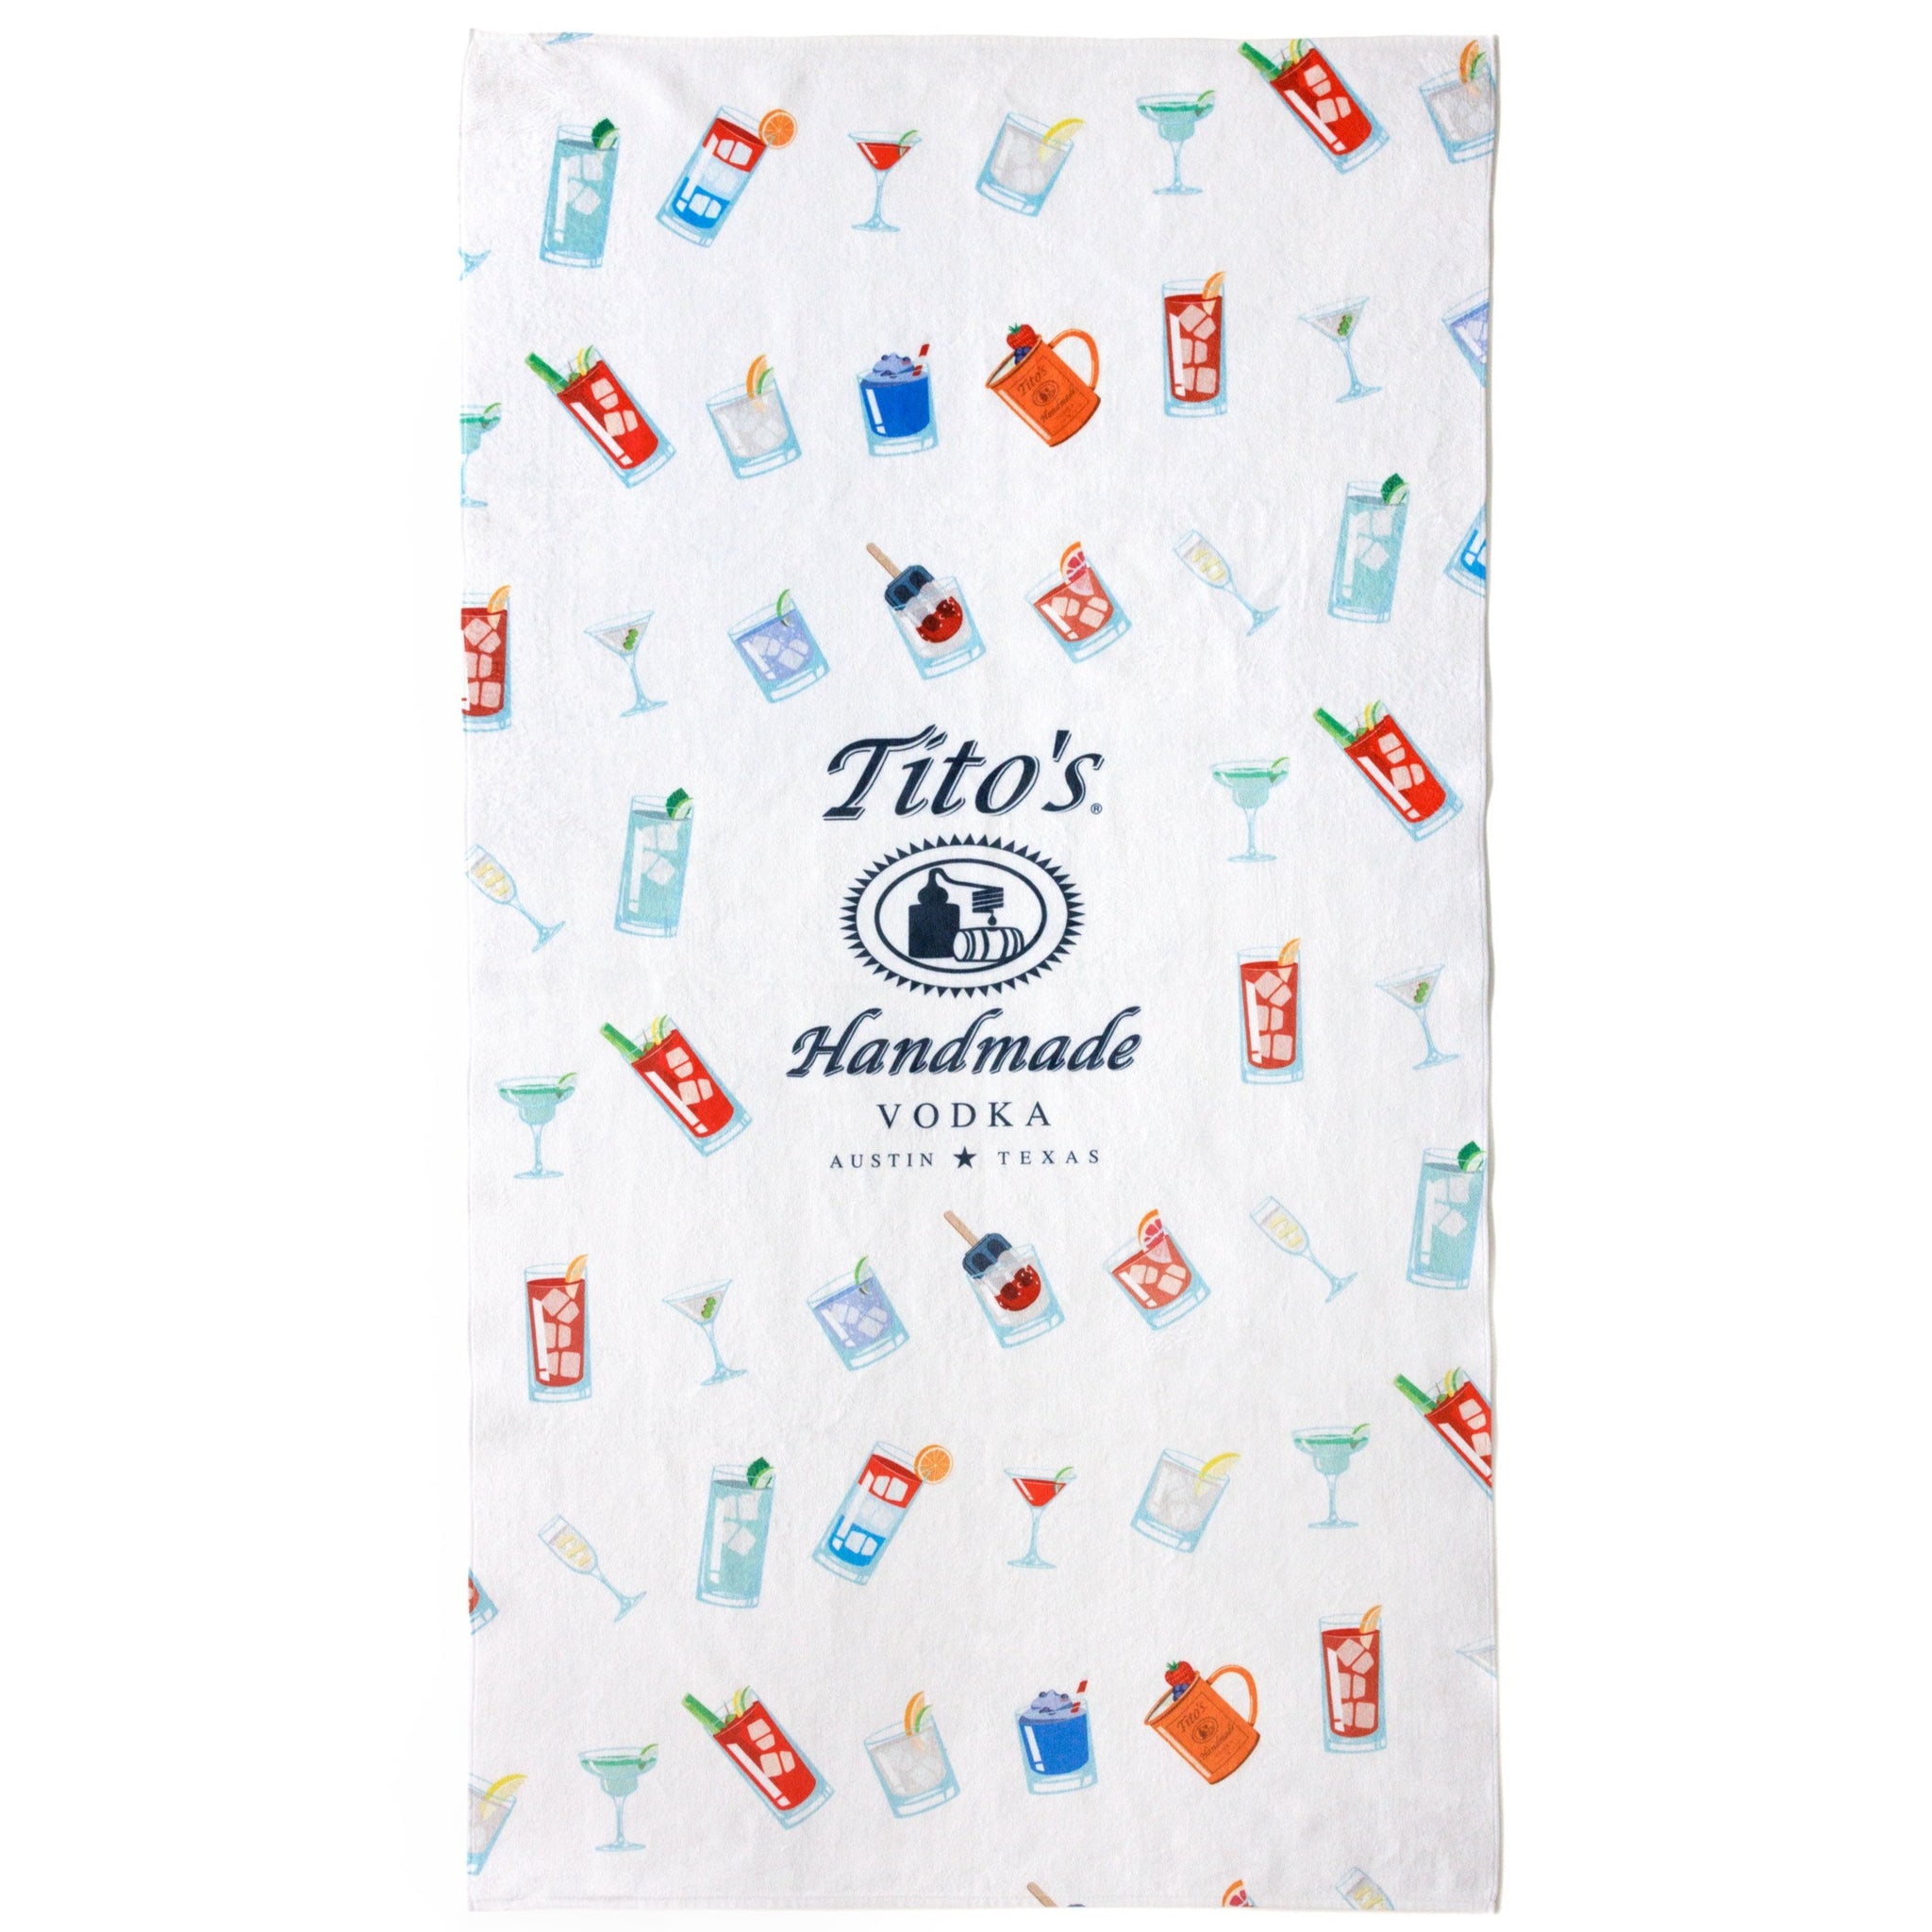 White towel with Tito's Handmade Vodka logo and assorted cocktail illustrations